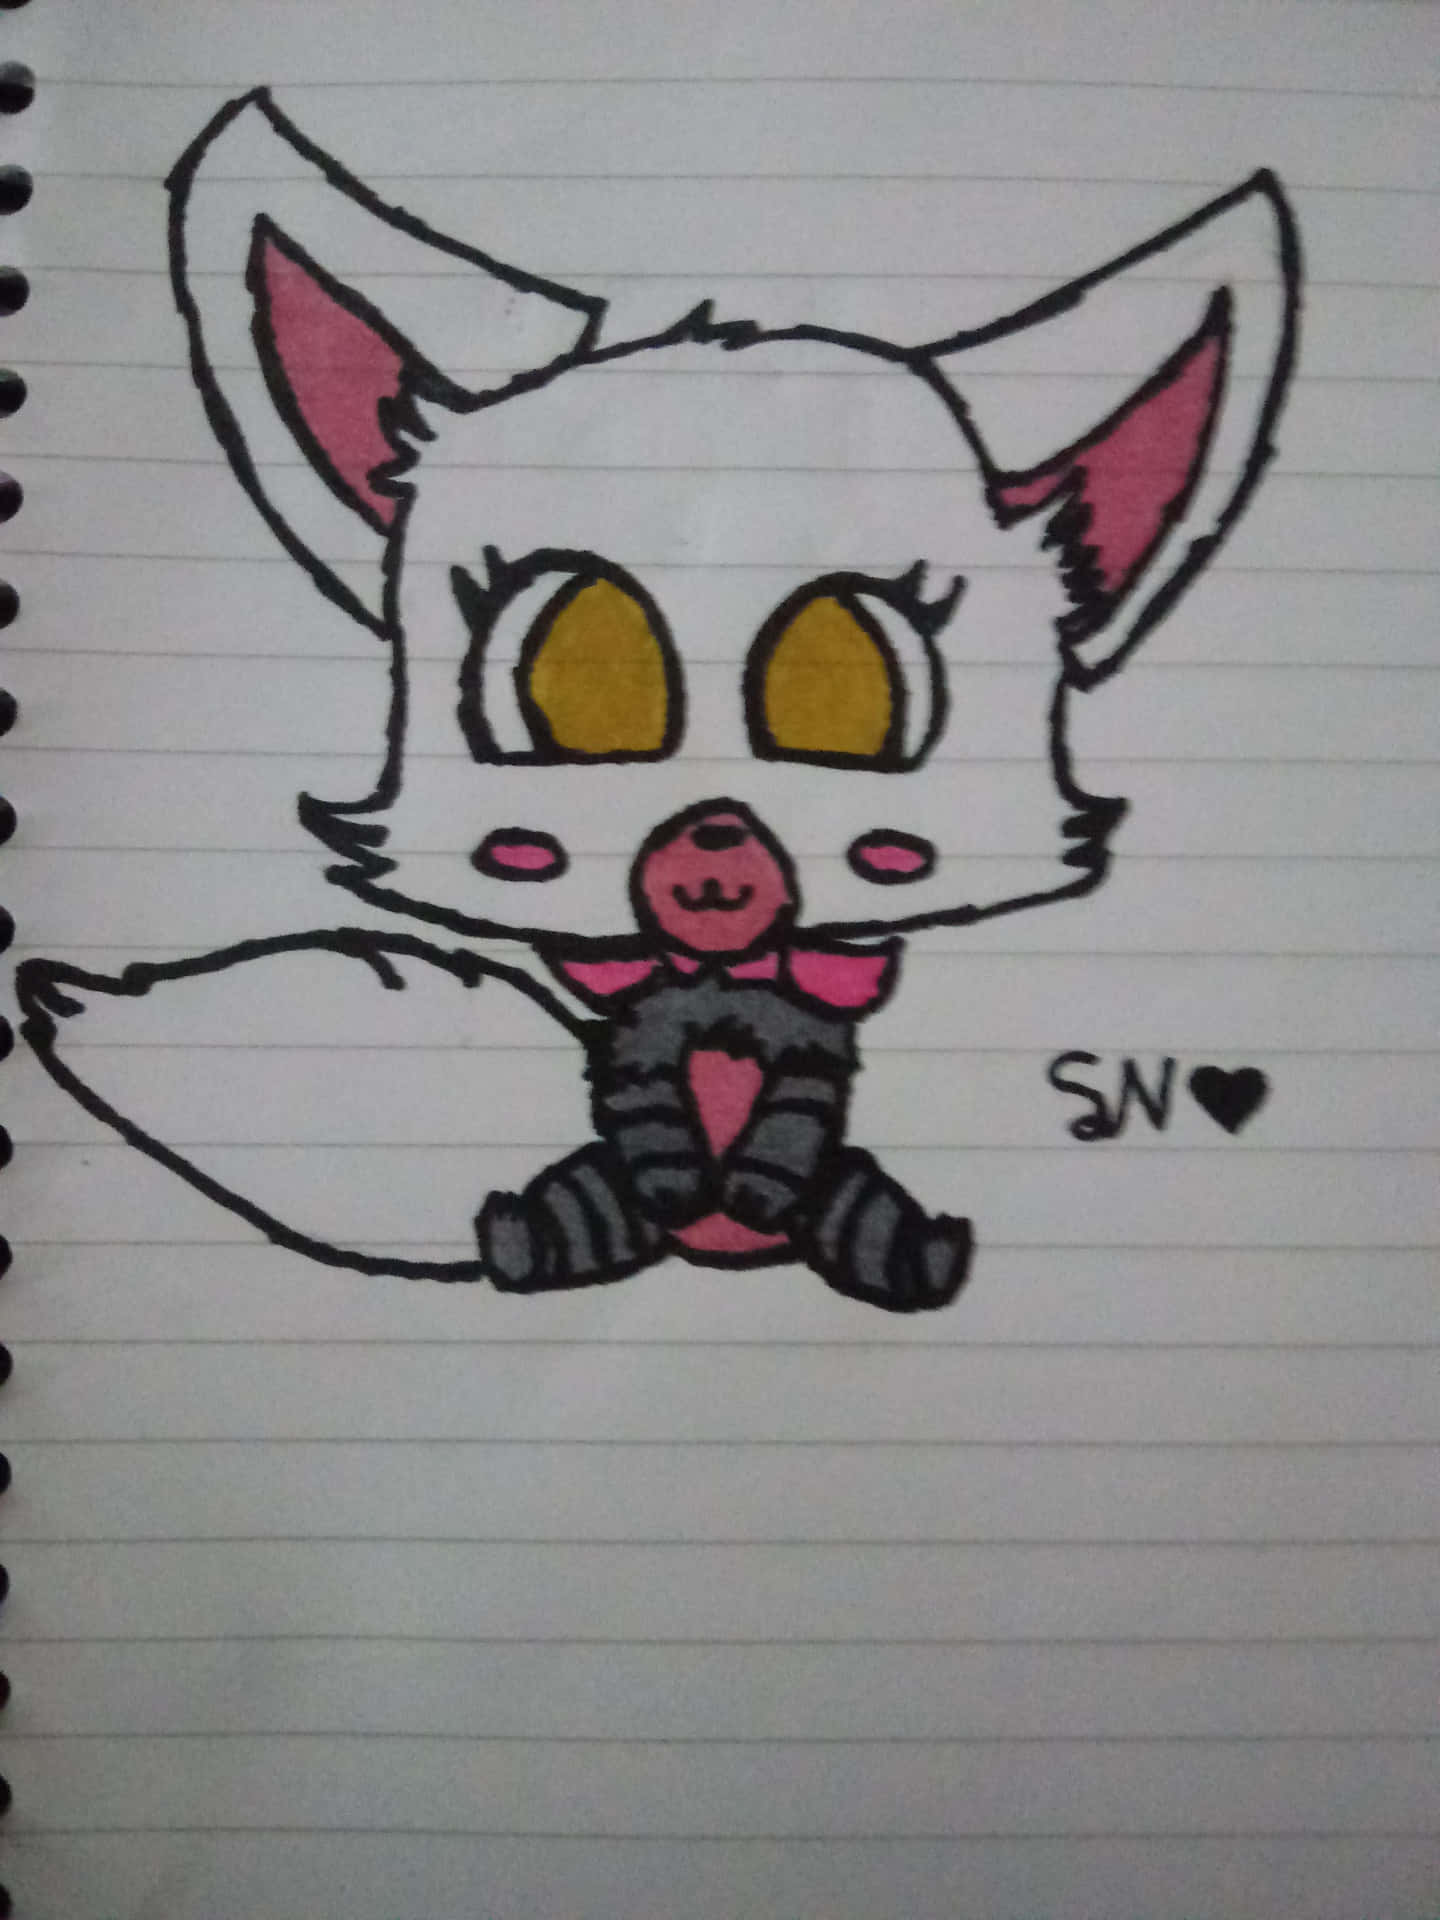 A Drawing Of A Fox With Pink Eyes And A Bow